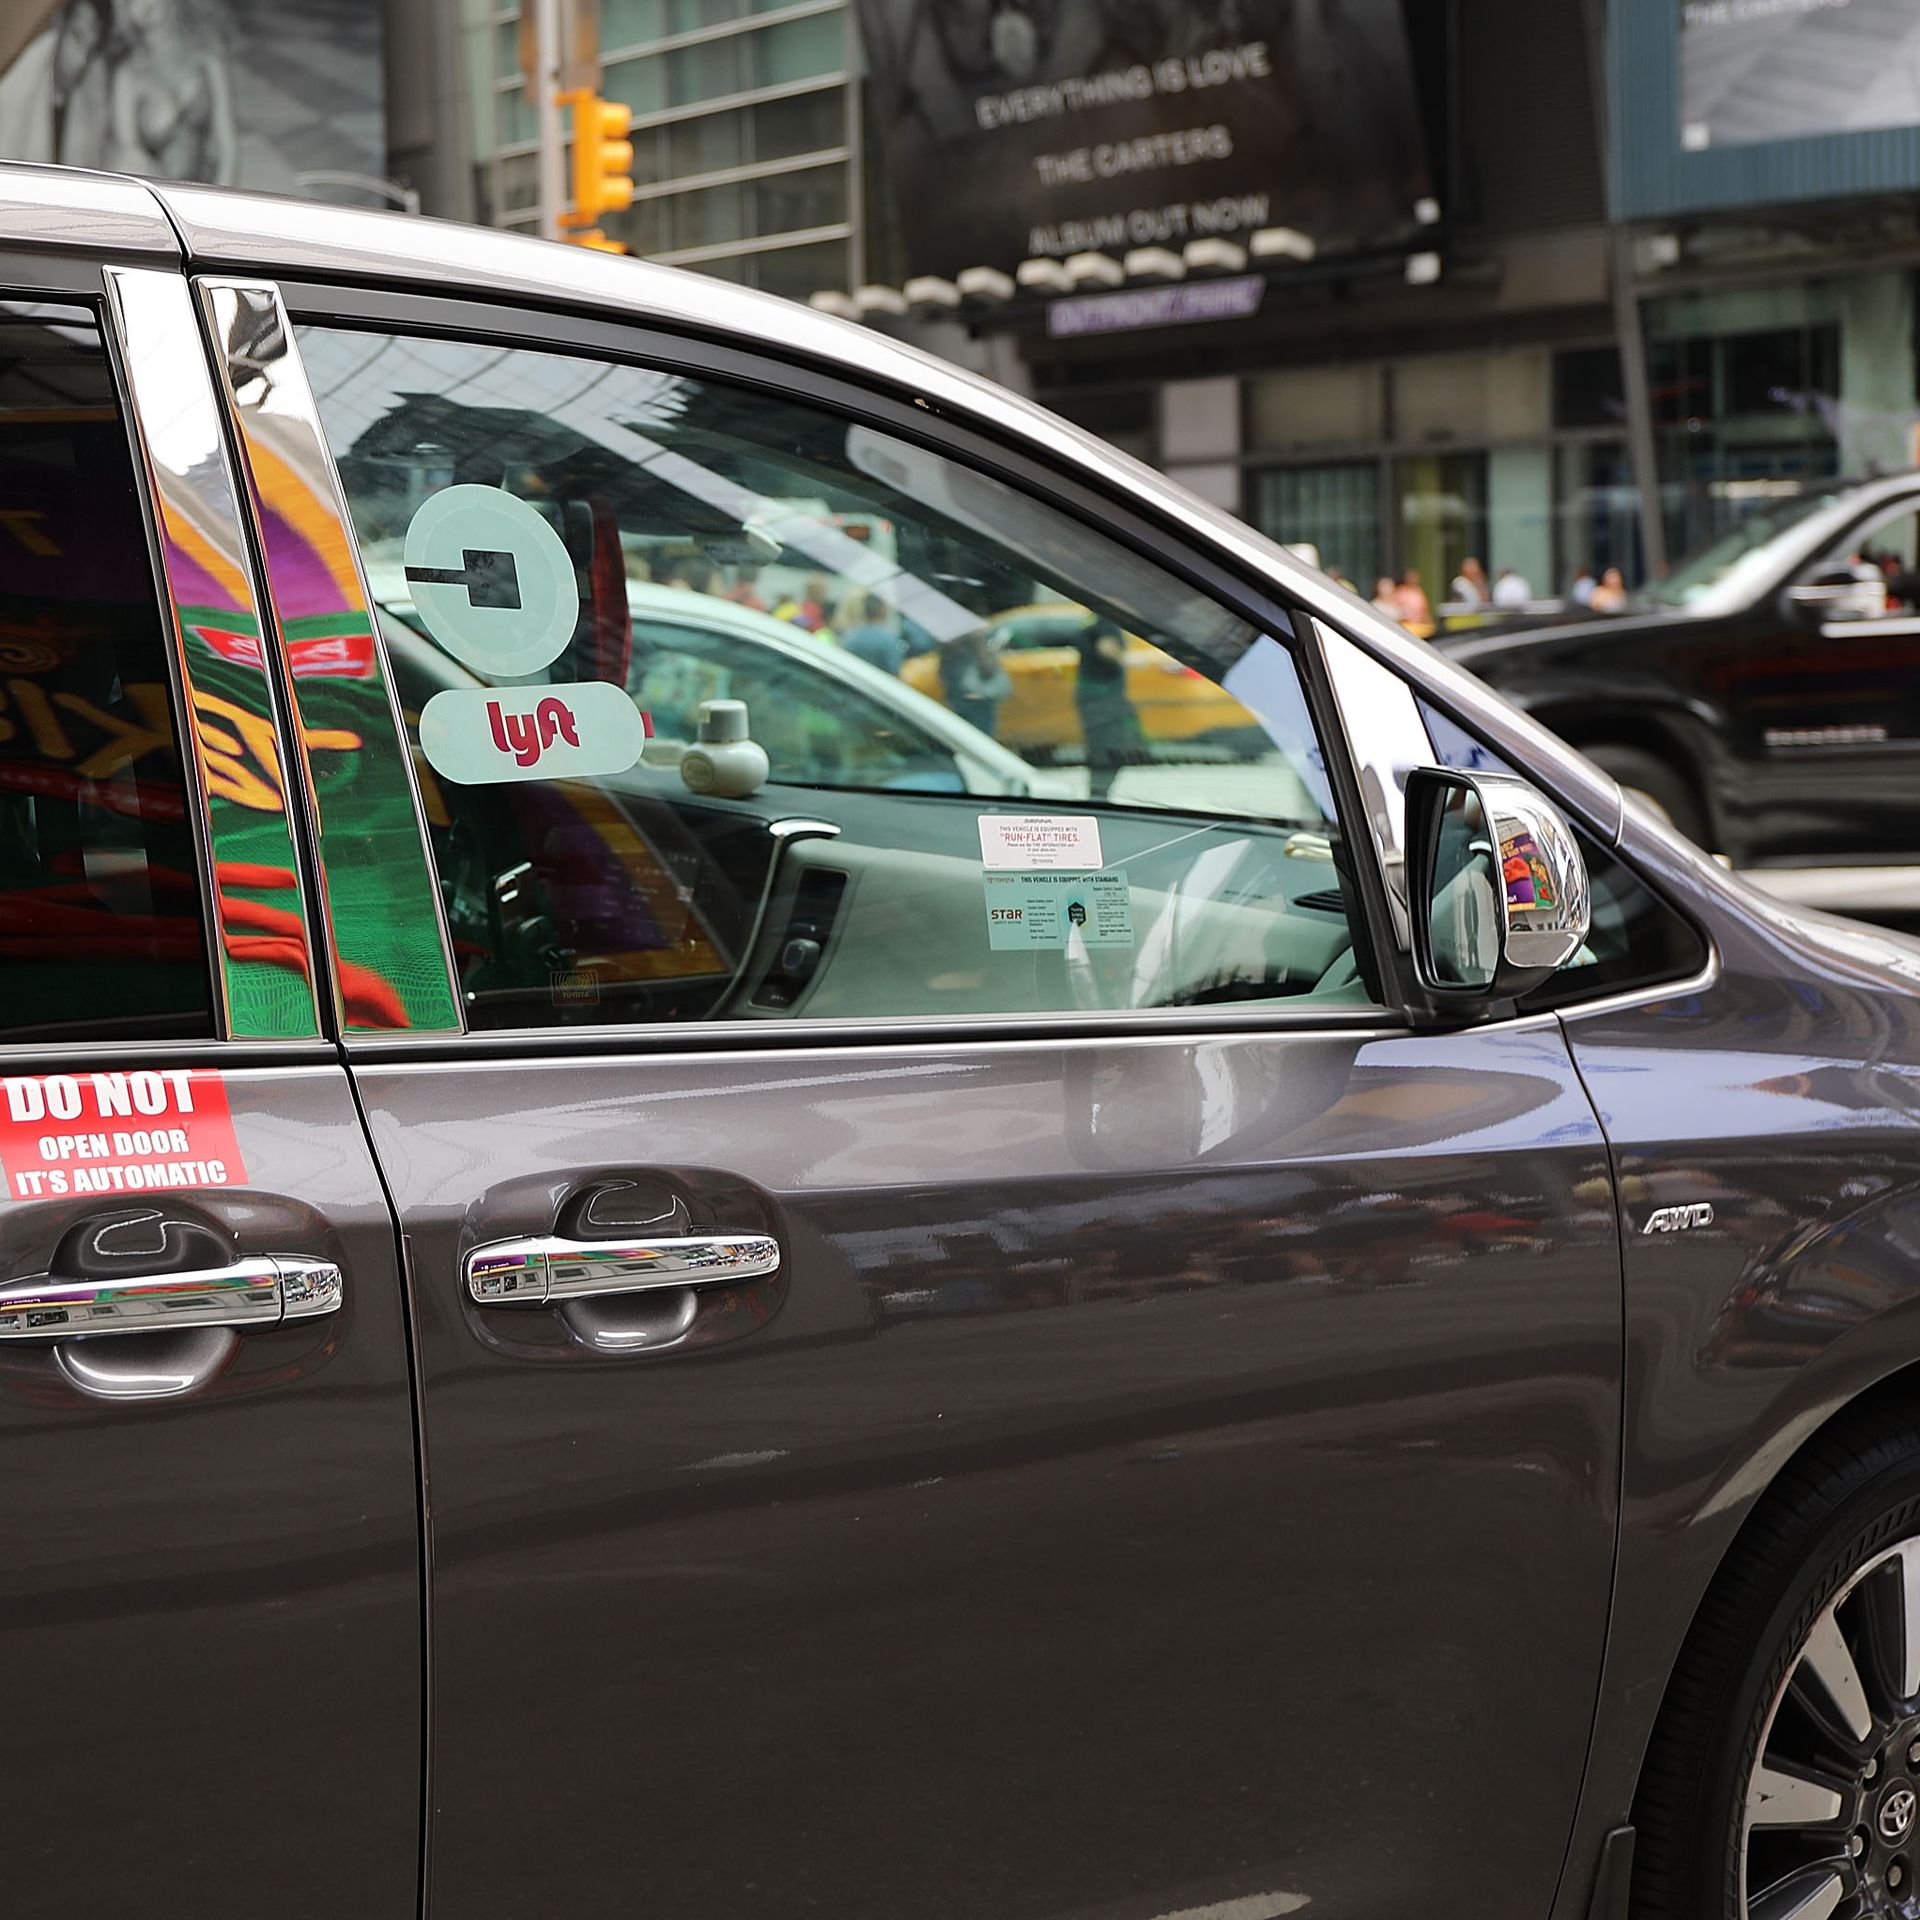 A van with Lyft and Uber window stickers moves through traffic in Manhattan